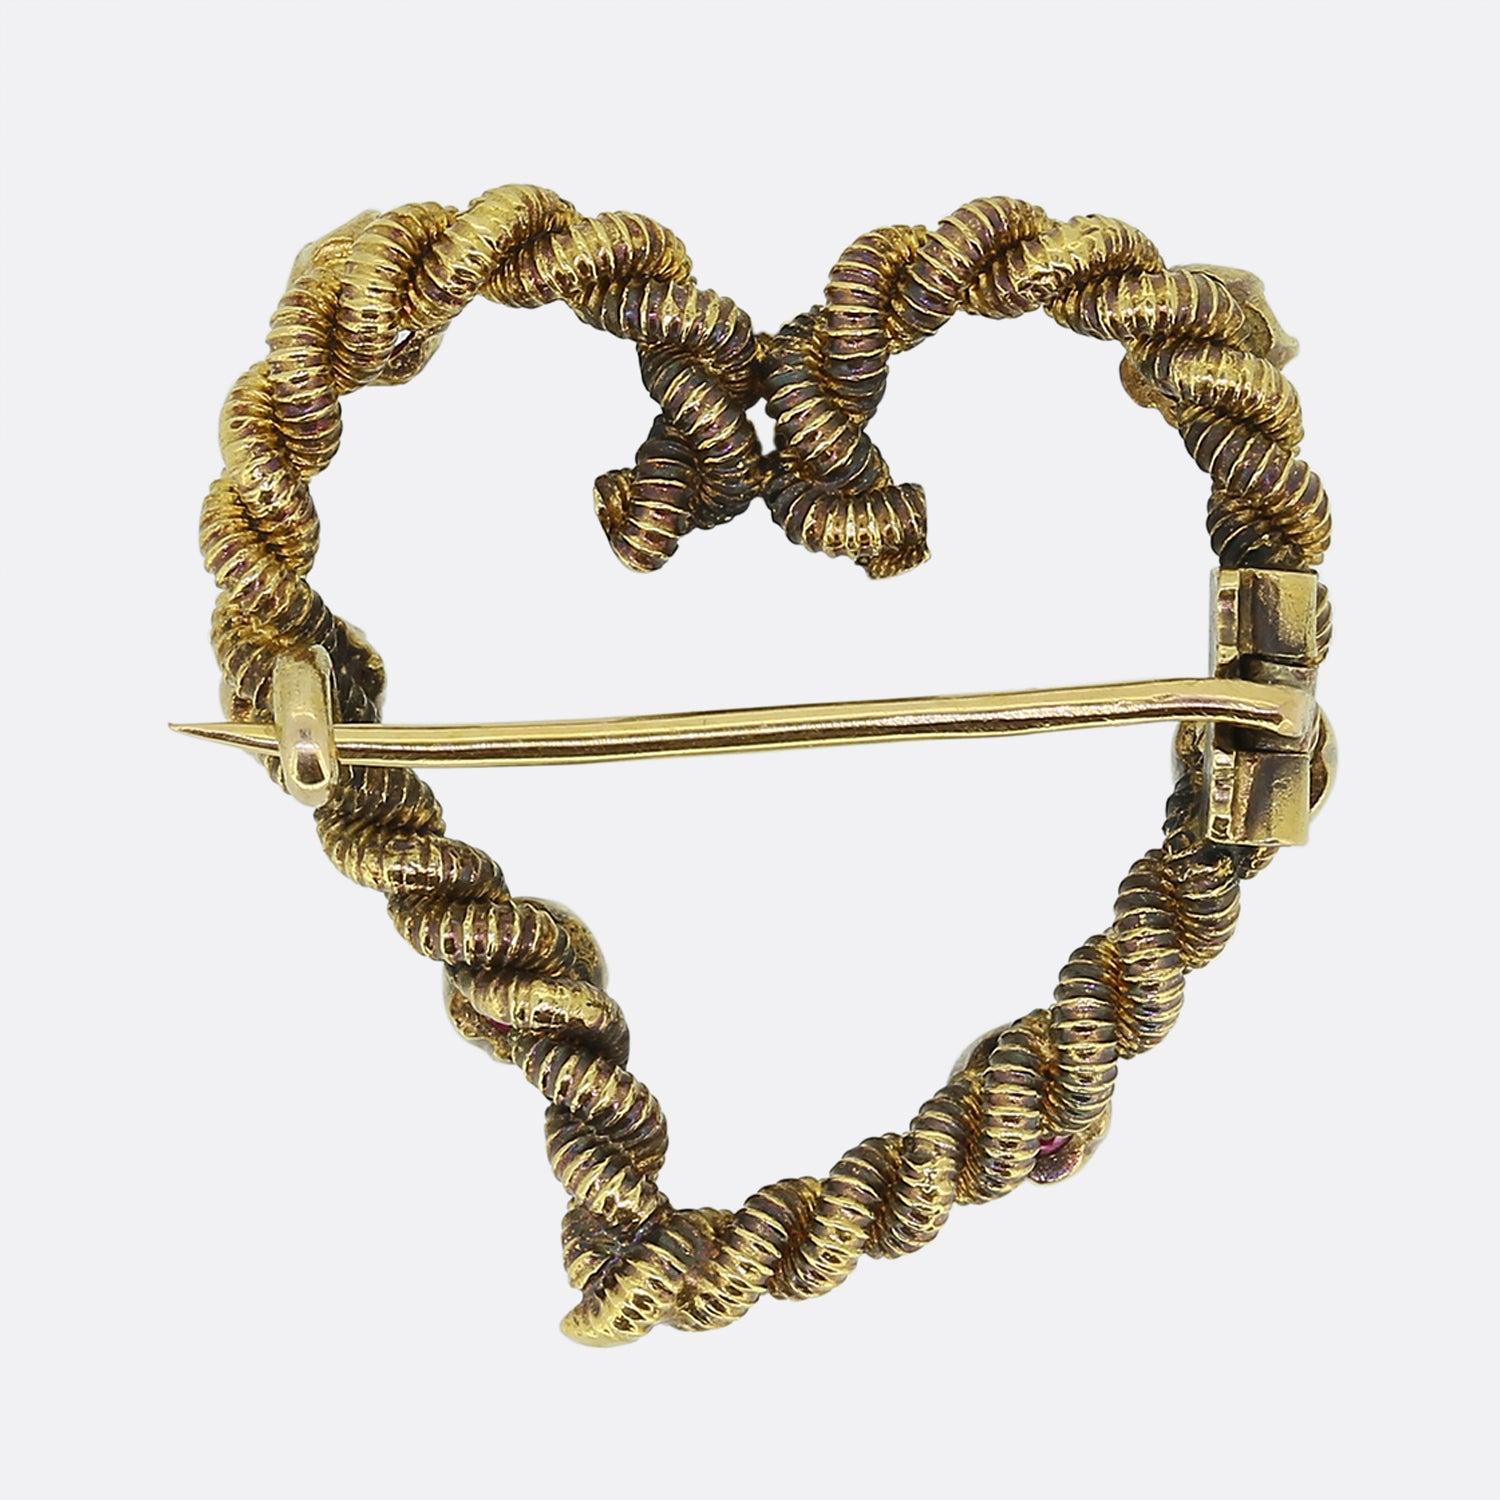 Here we have a delightful antique brooch dating back to the Victorian period. This romantic piece has been crafted from 22ct yellow gold into the shape an open love heart. This frame showcases a roped design and plays host to six claw set pinky